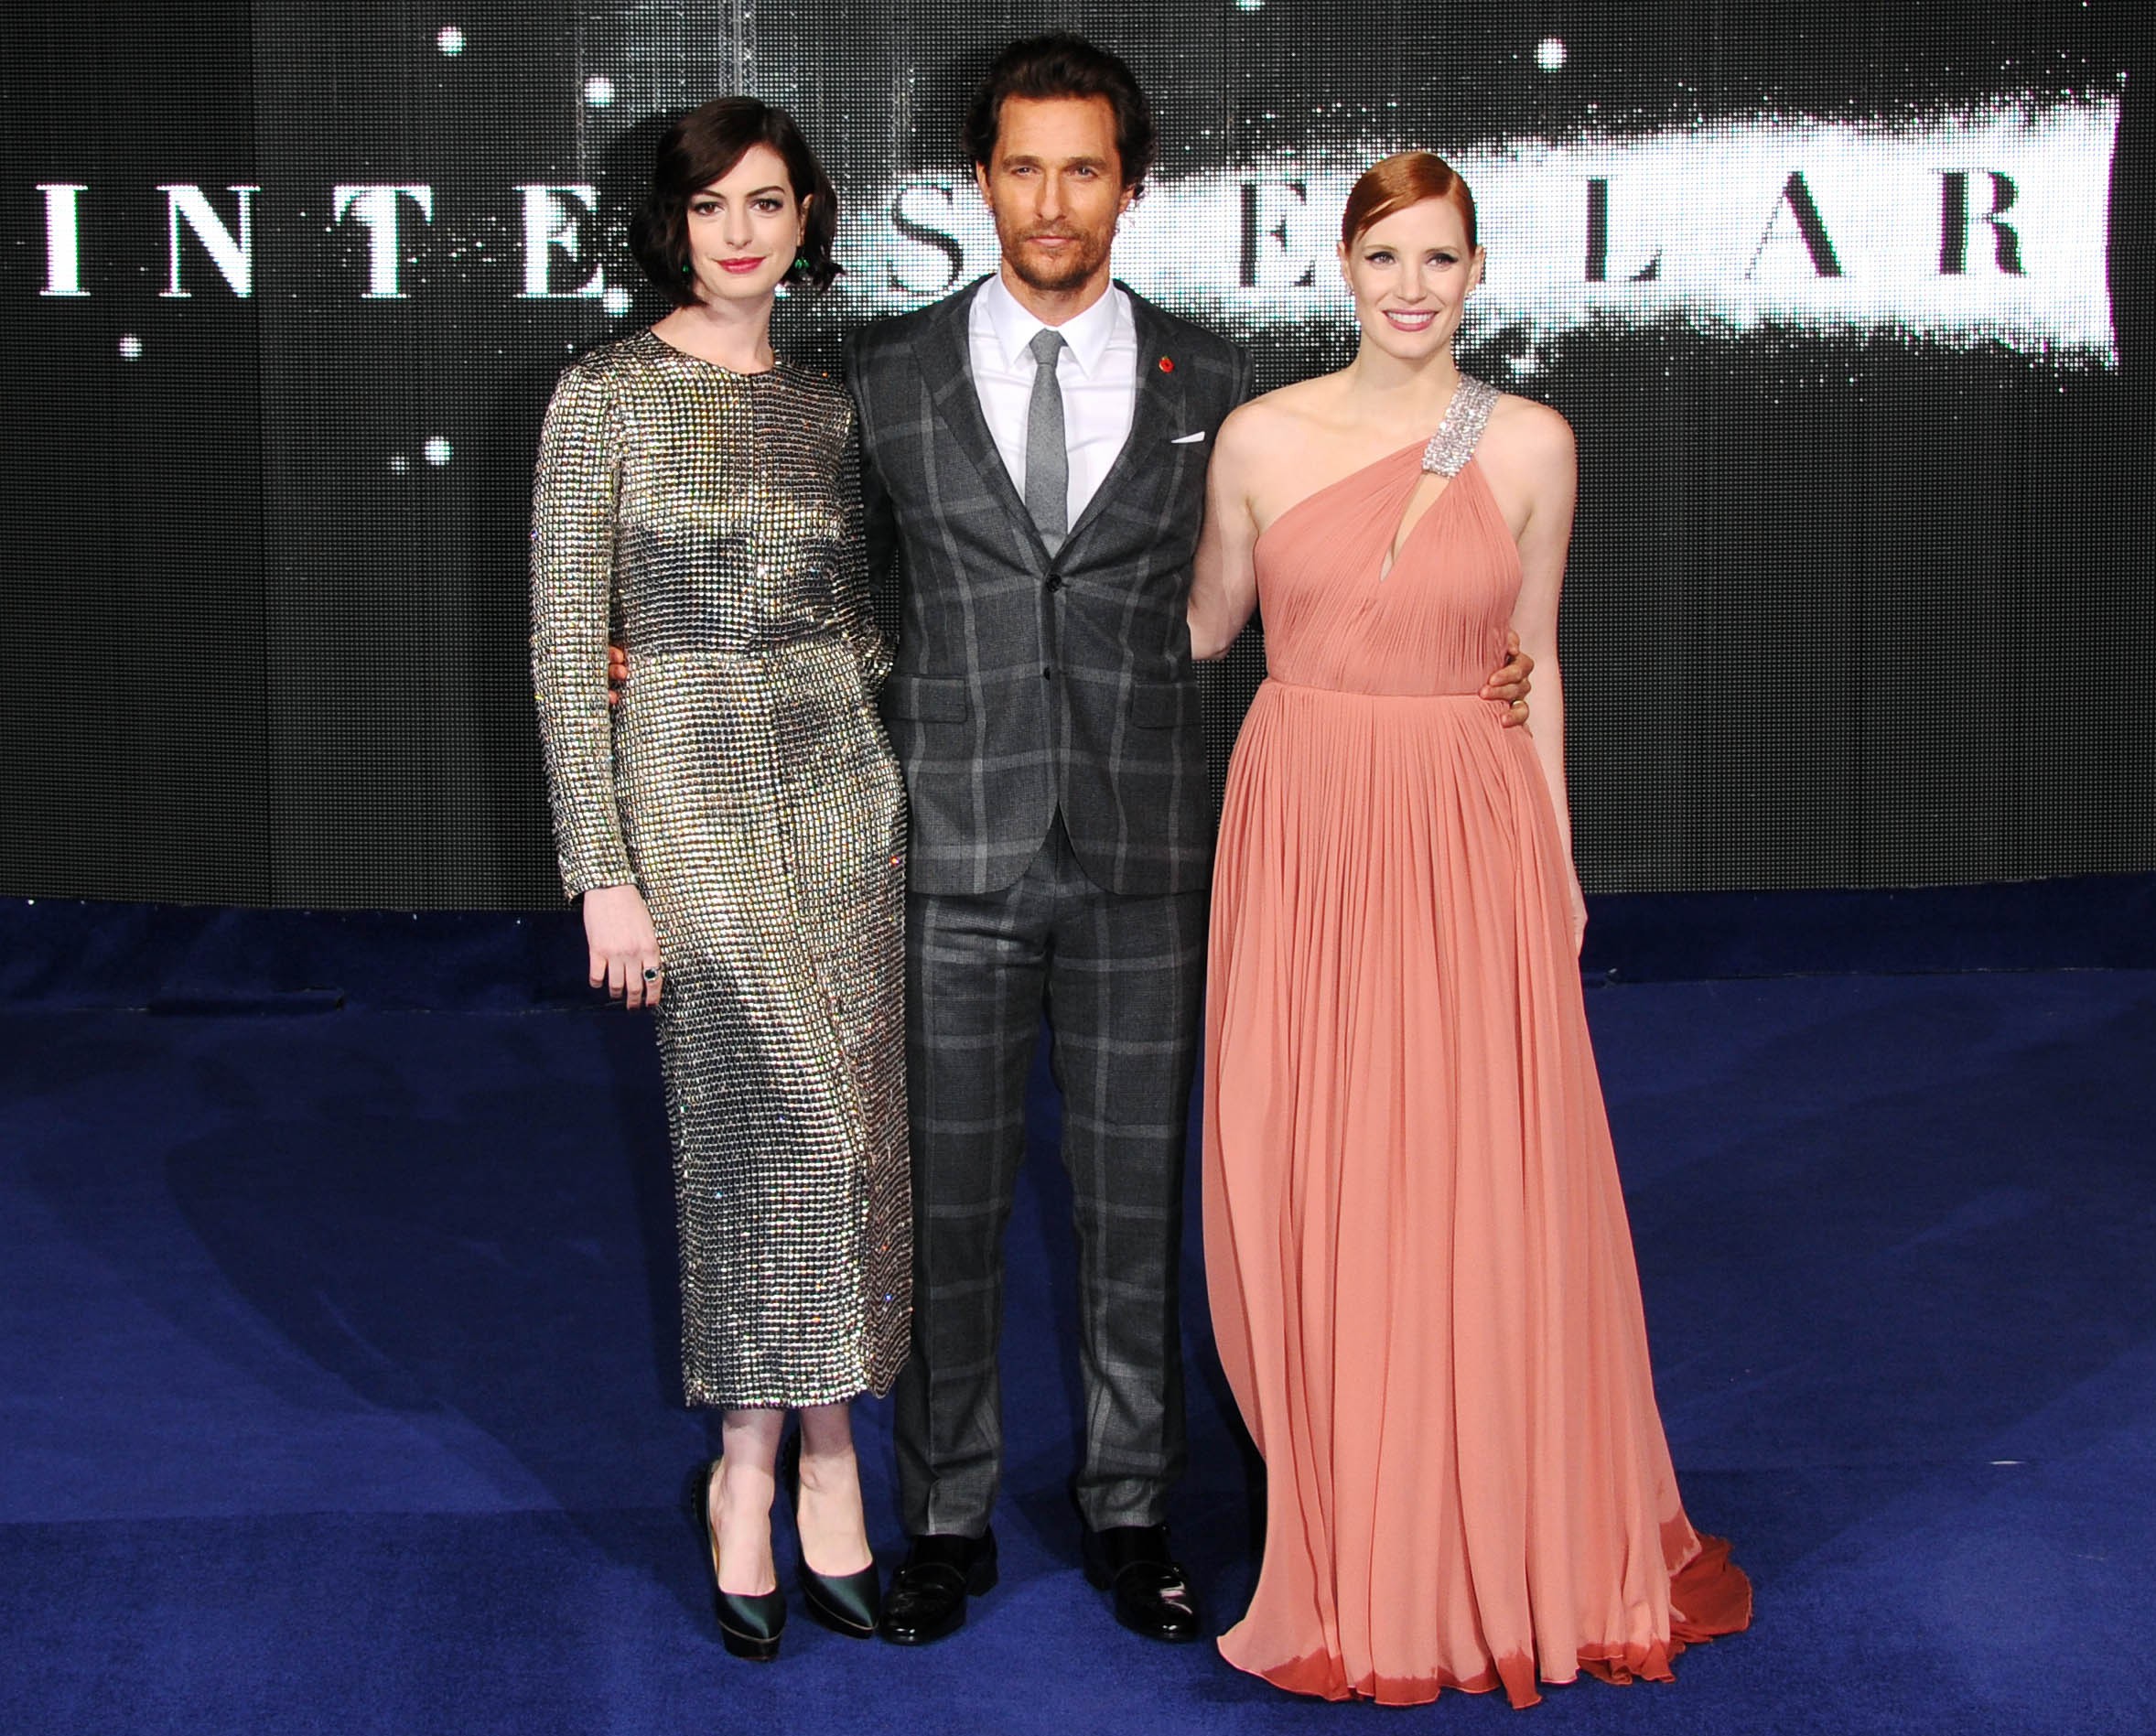 Anne Hathaway, Matthew McConaughey e Jessica Chastain (Foto: Getty Images)